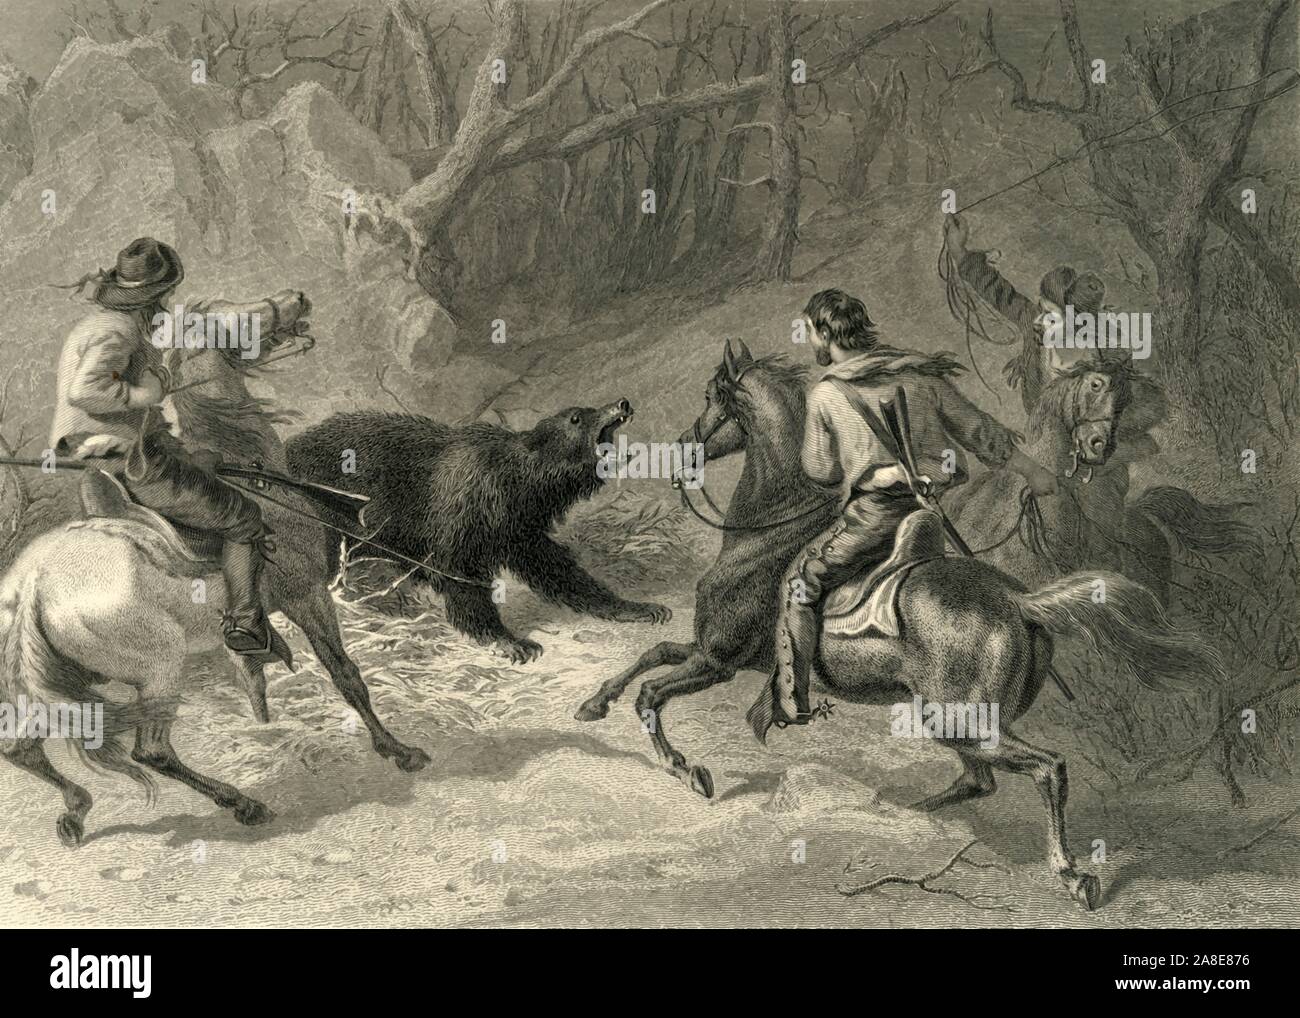 'Native Californians Lassoing a Bear', 1874. Three American men on horseback attempt to rope a grizzly bear. From &quot;Picturesque America; or, The Land We Live In, A Delineation by Pen and Pencil of the Mountains, Rivers, Lakes...with Illustrations on Steel and Wood by Eminent American Artists&quot; Vol. II, edited by William Cullen Bryant. [D. Appleton and Company, New York, 1874] Stock Photo